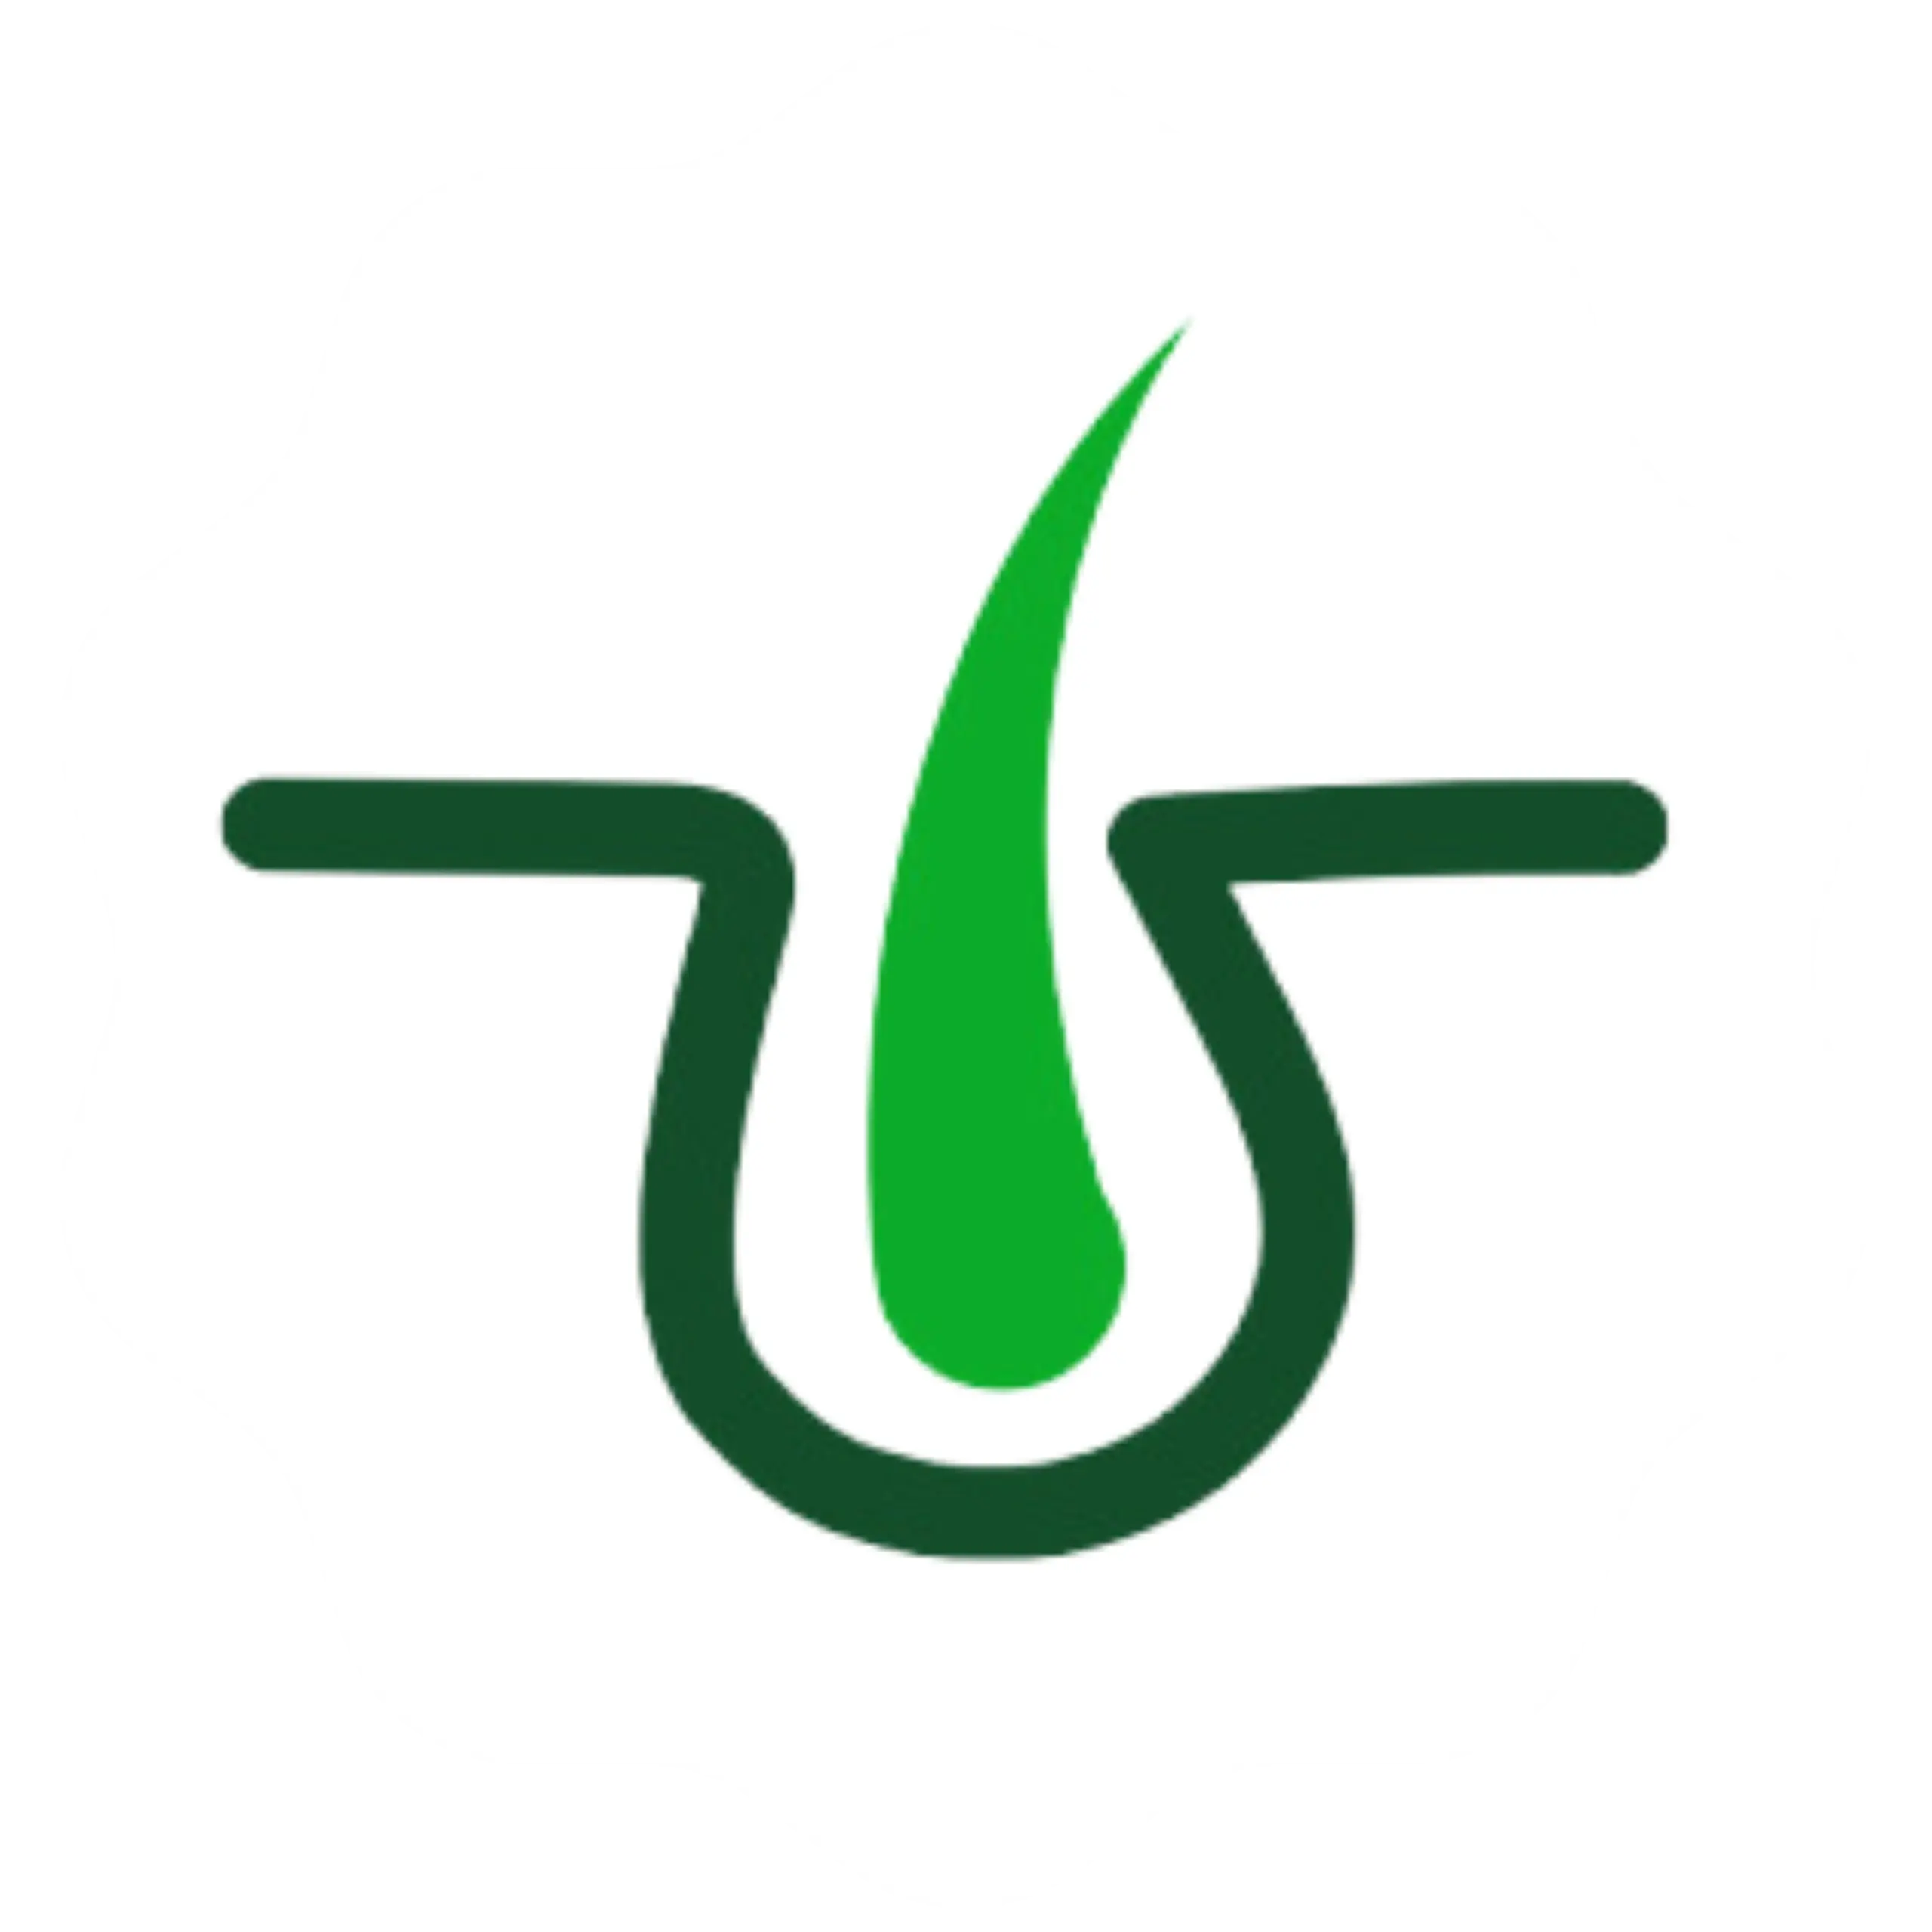 Logo featuring a stylized green and white emblem resembling a flame or a drop, set against a black background.